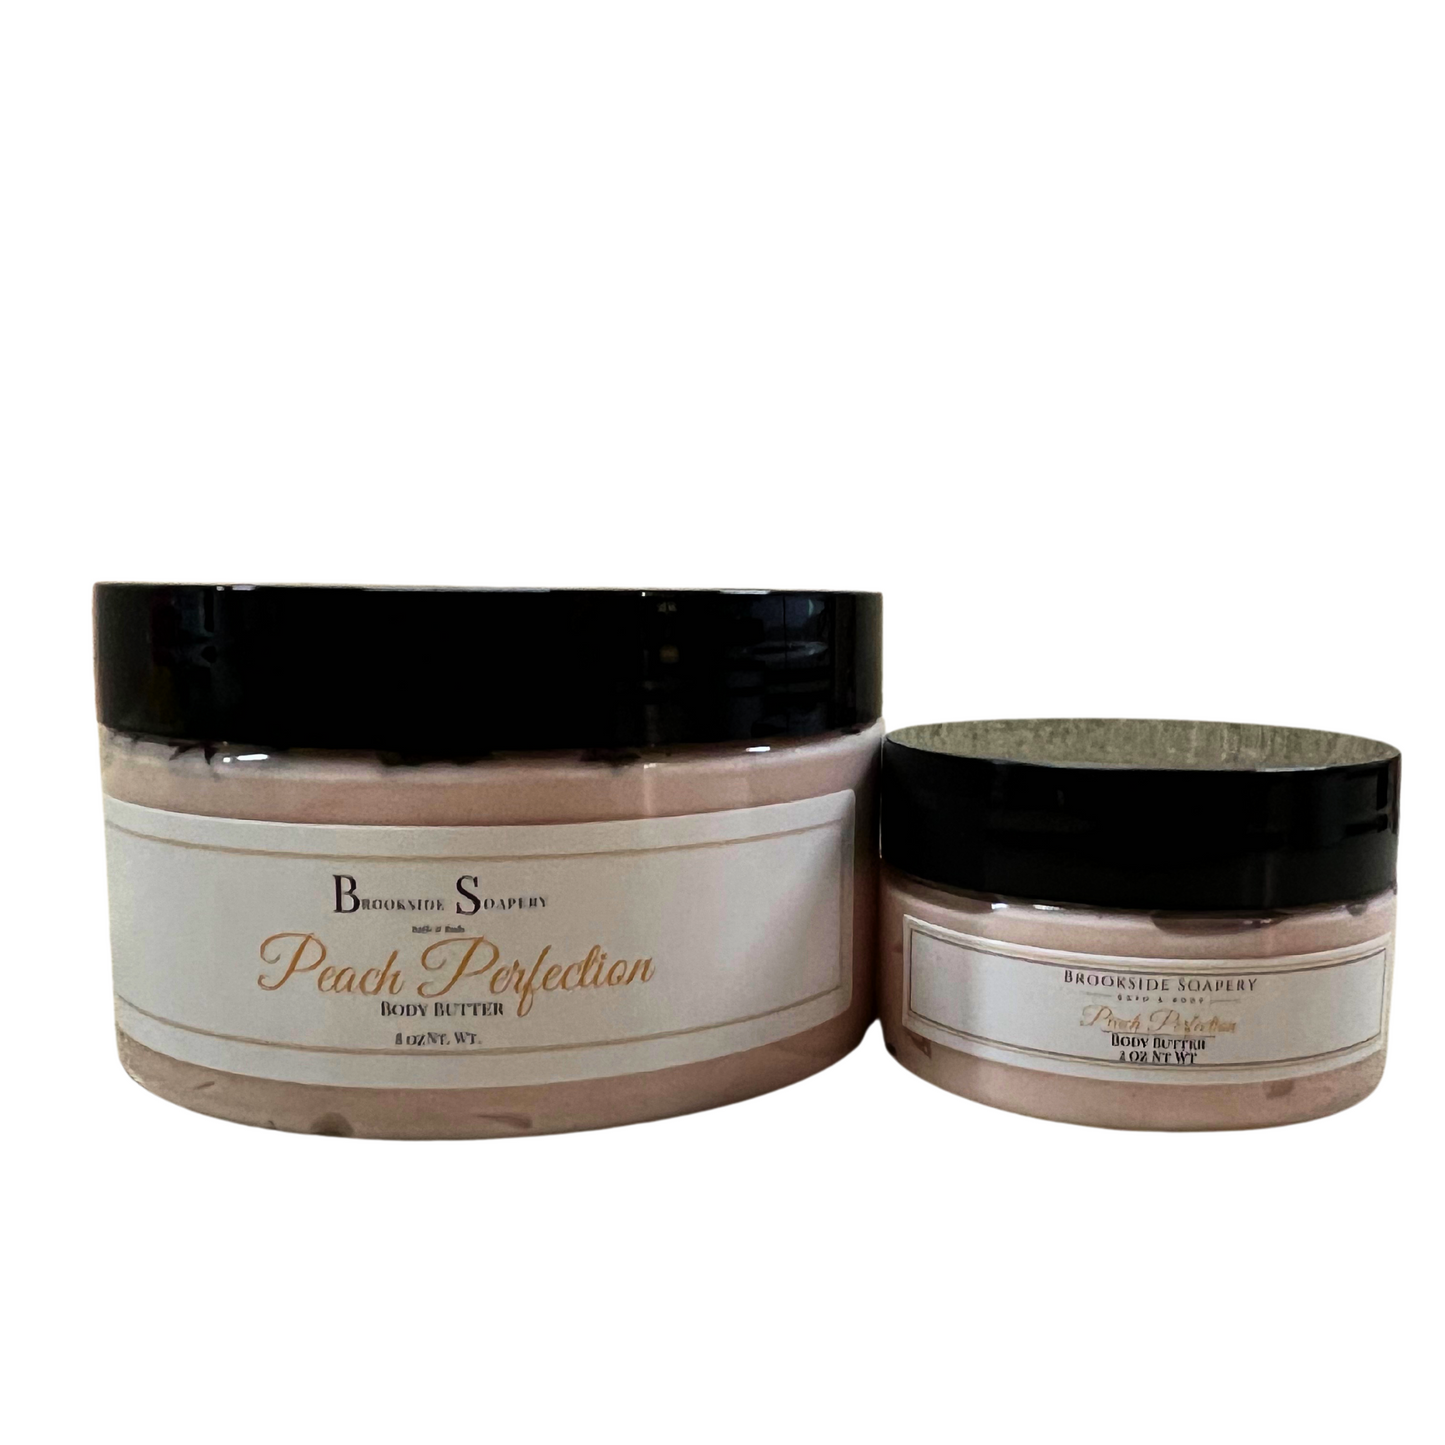 Peach Perfection Body Butter